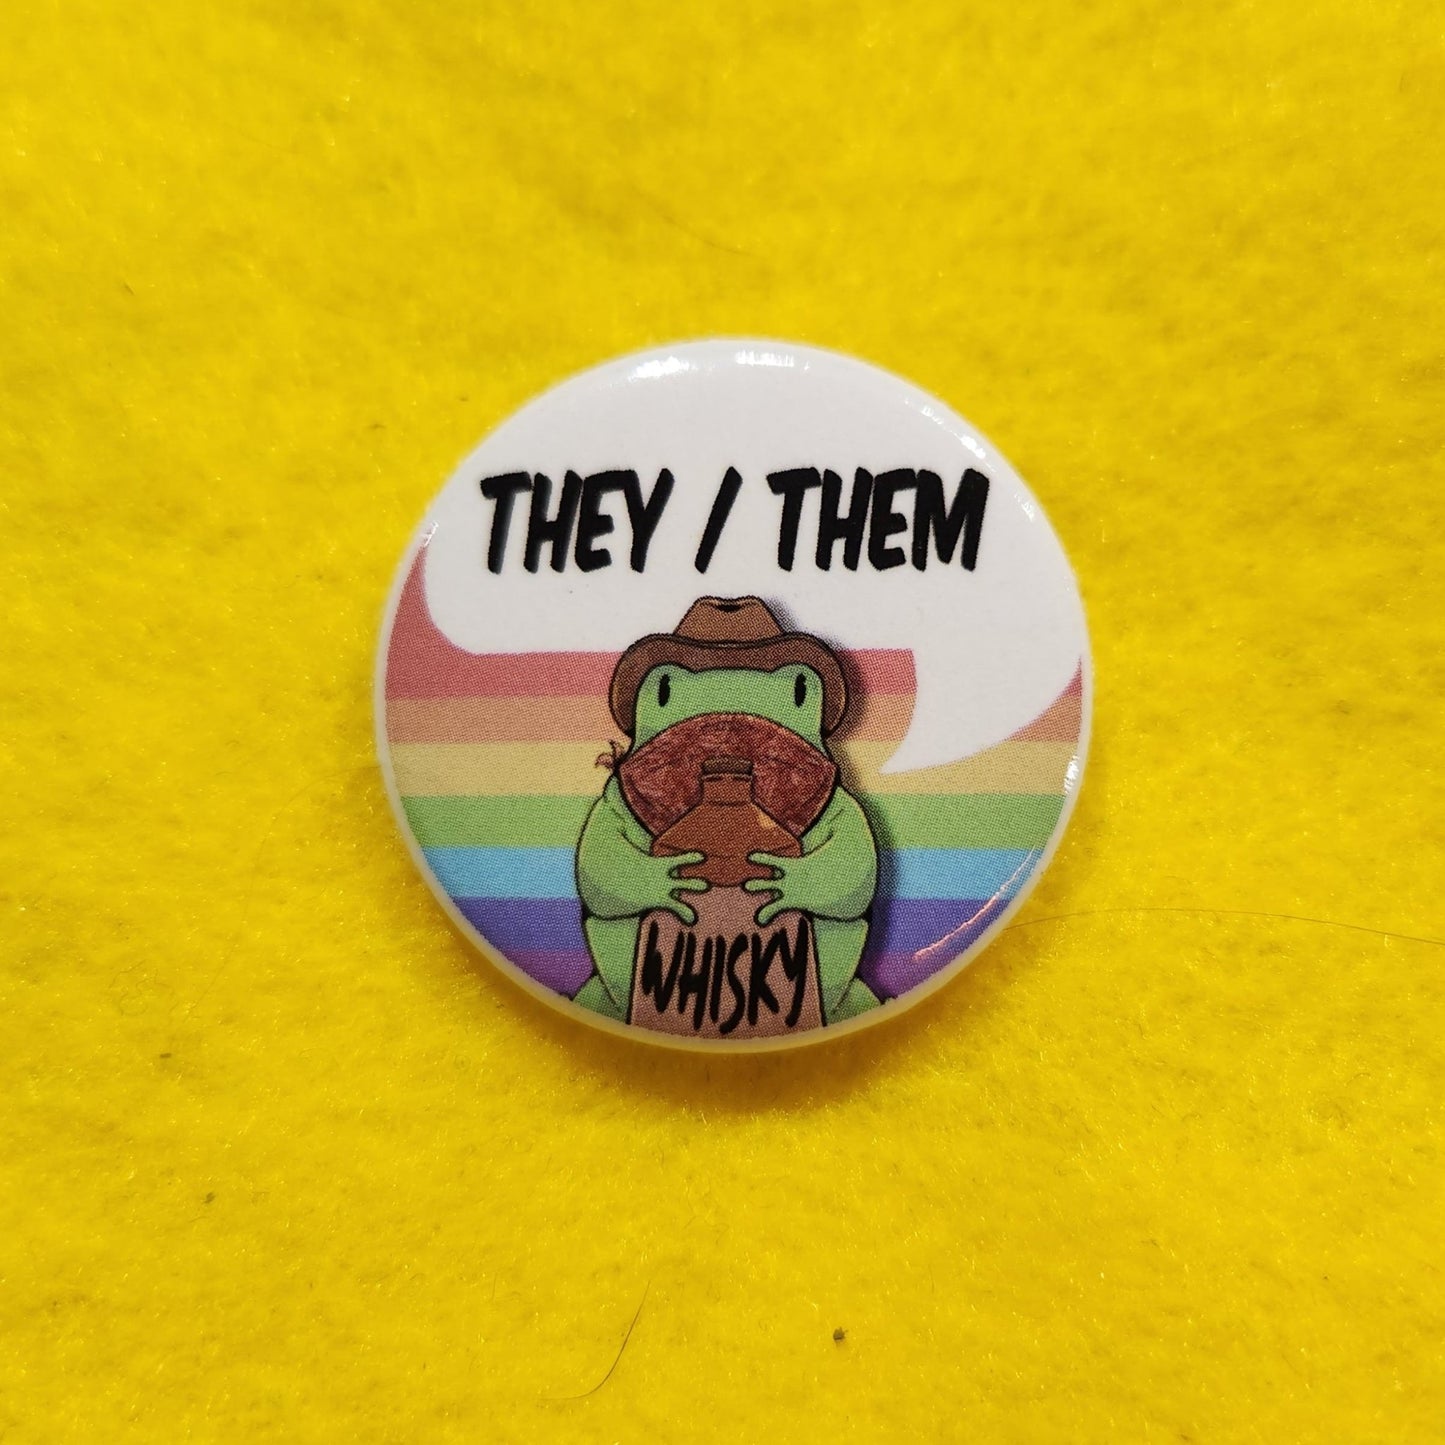 Whisky Frog Pronoun Button | THEY/THEM | 1.25" - Deviantkreations